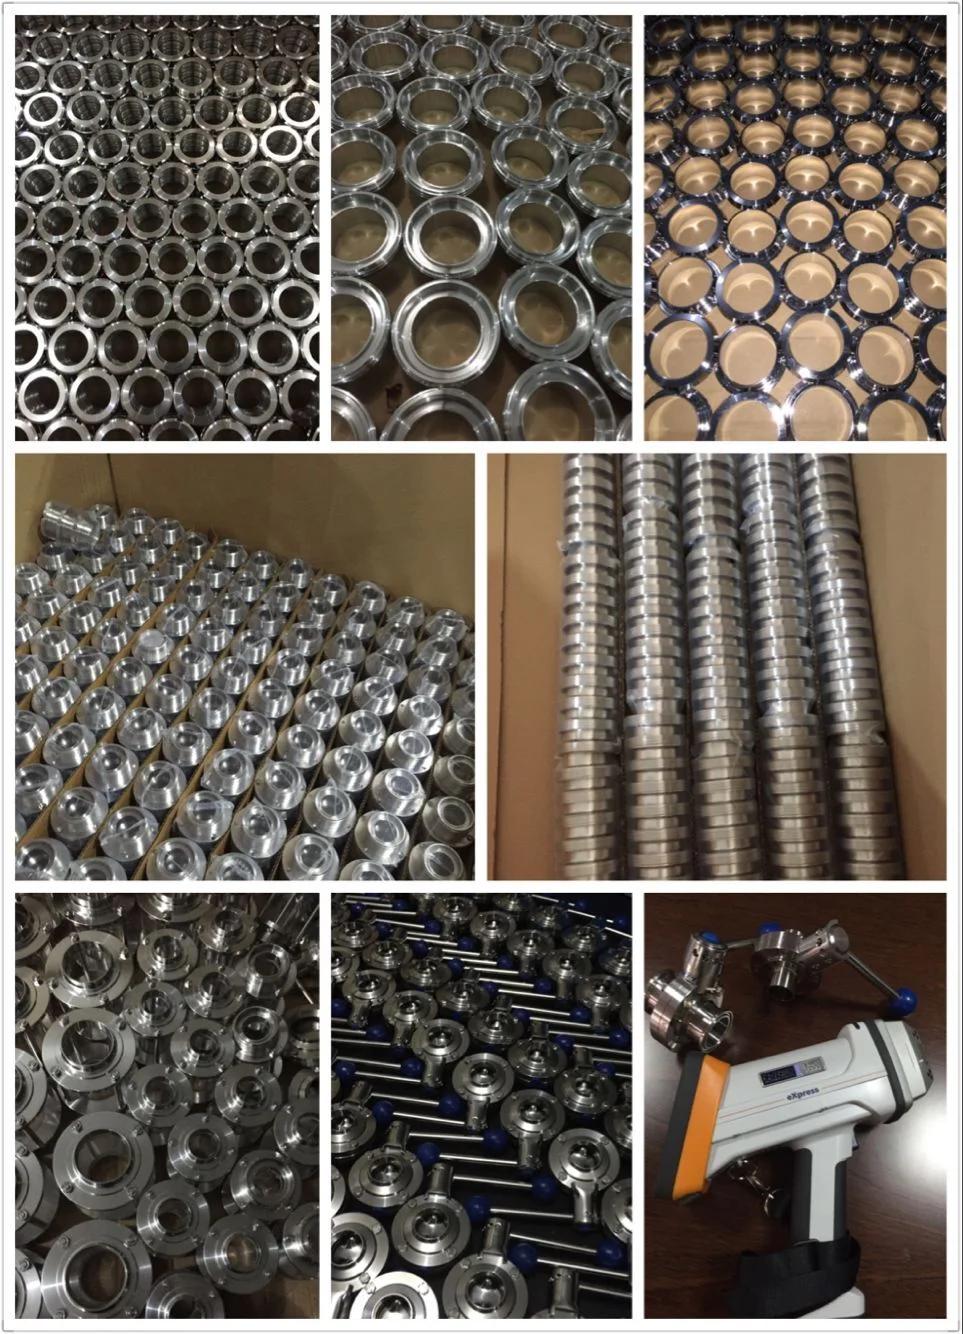 Food Grade Sanitary Stainless Steel Rotary Cleaning Ball